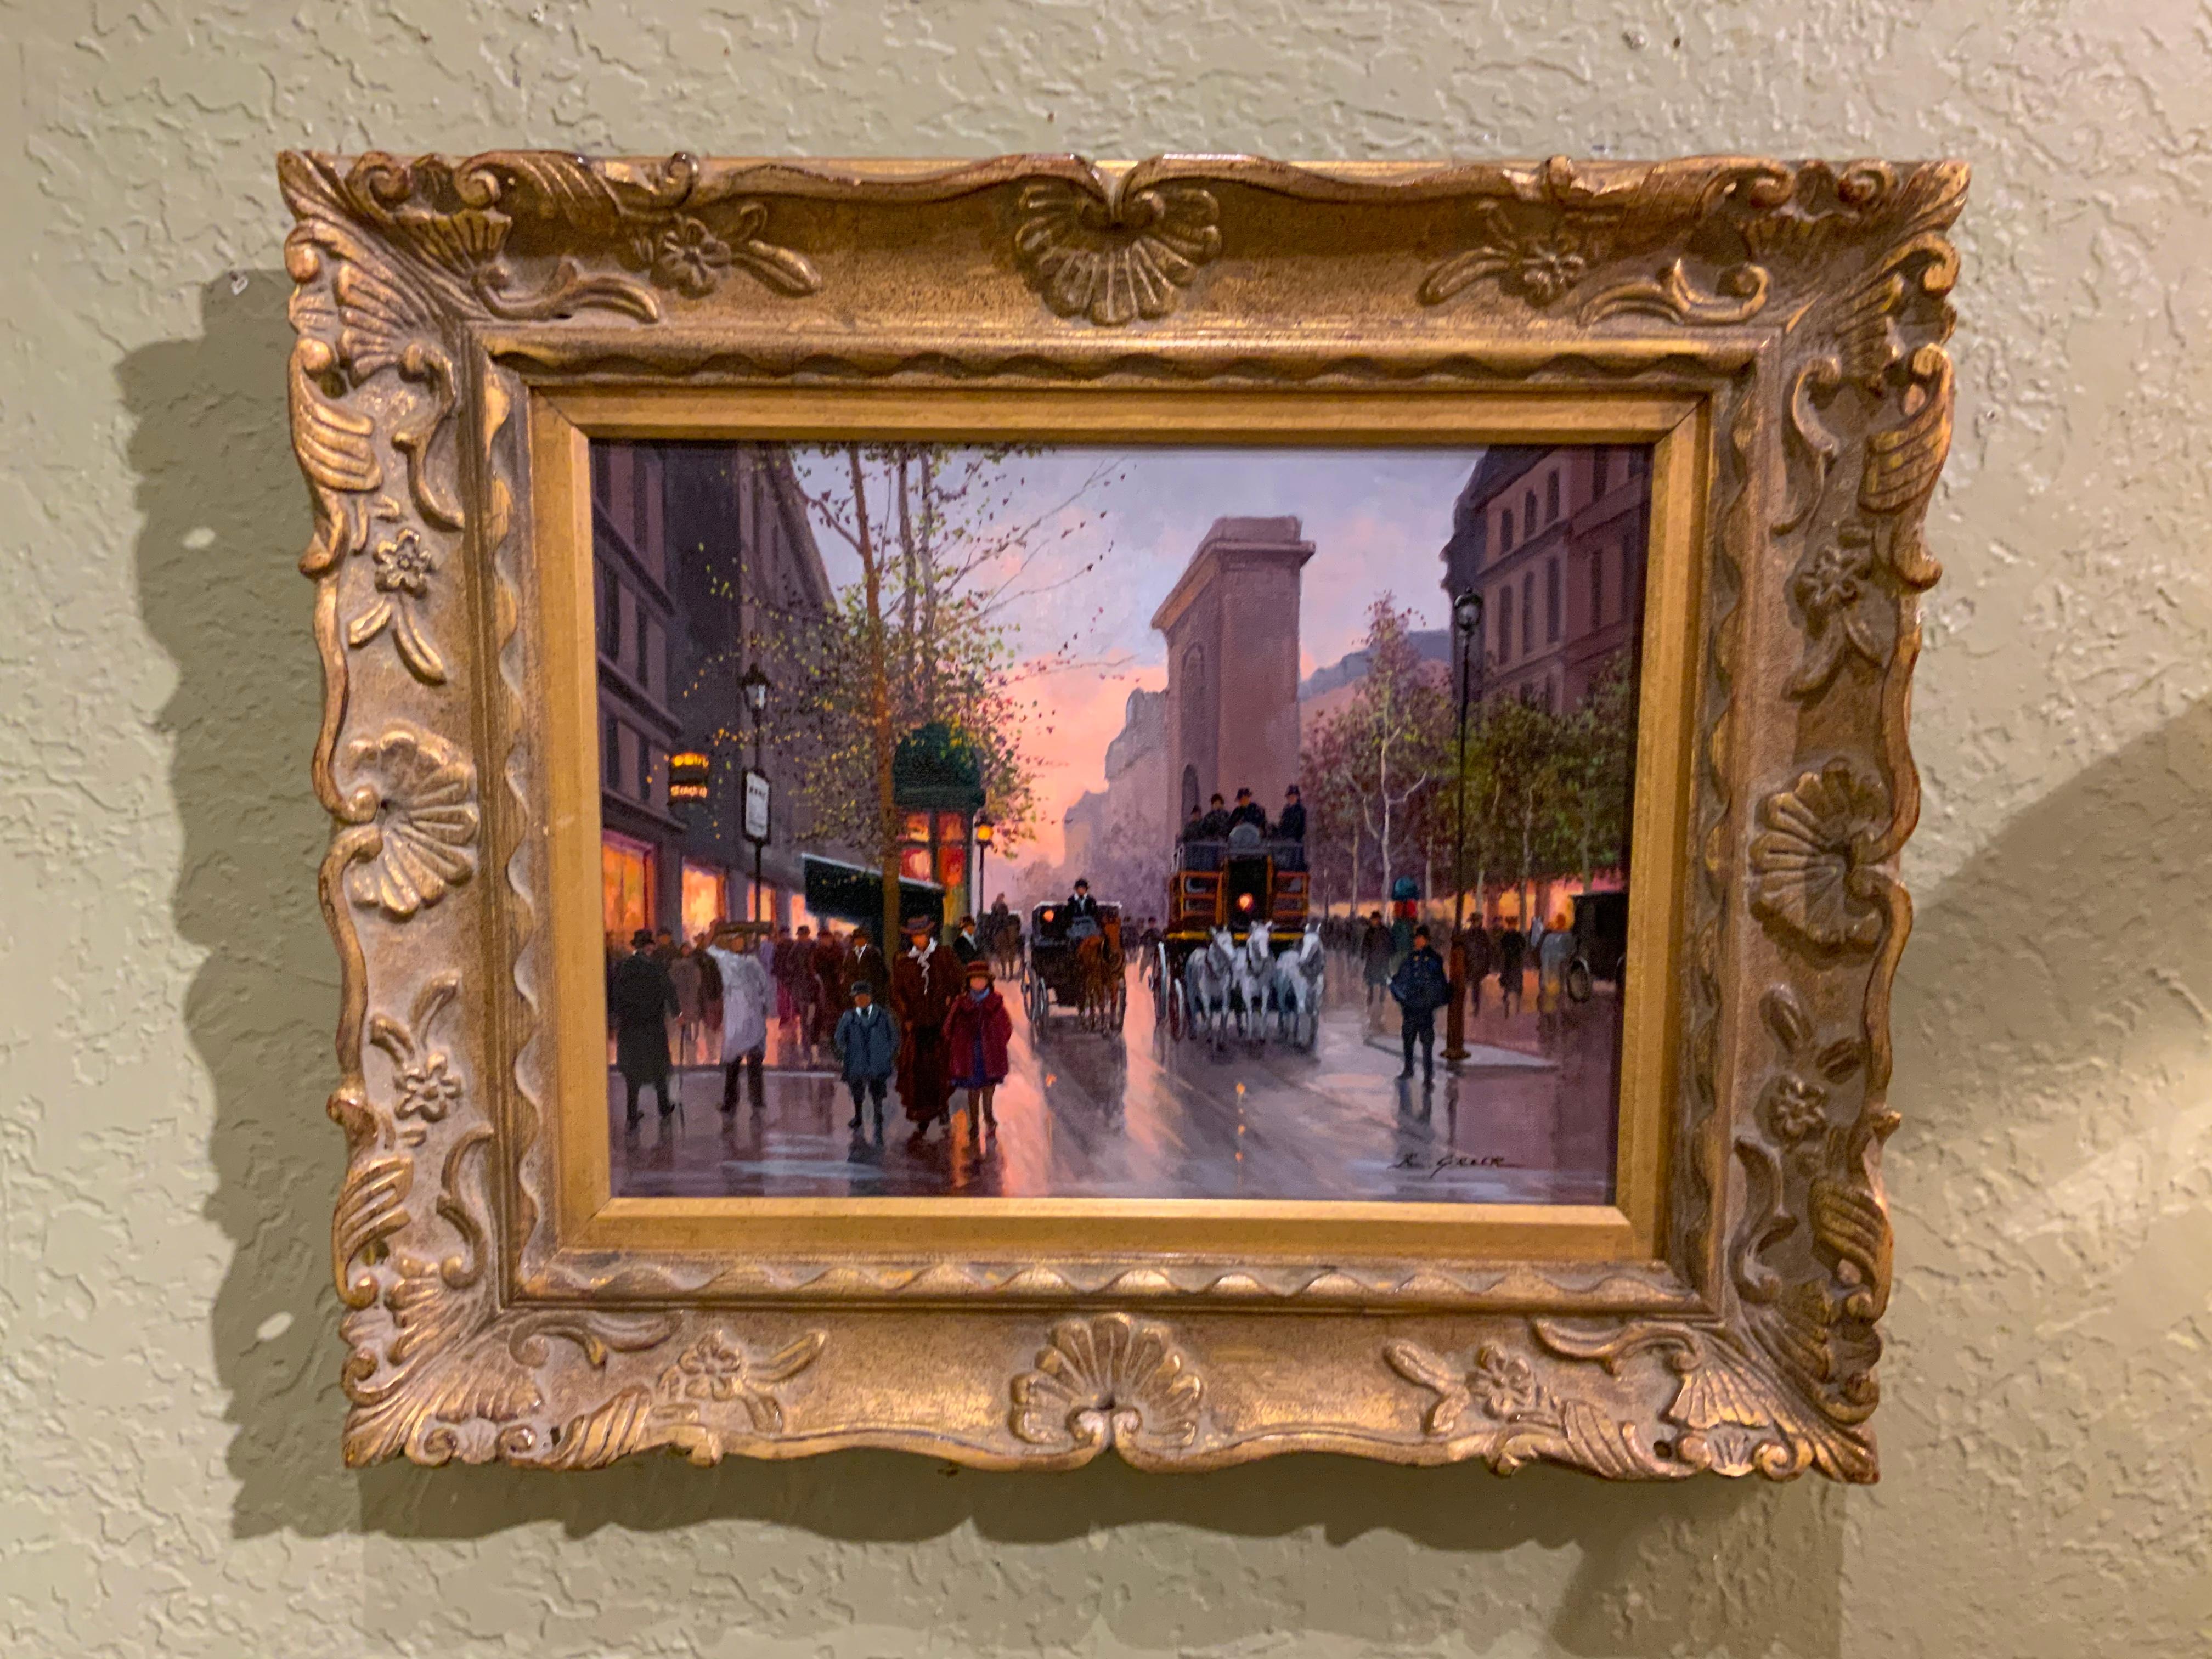 Texas artist Ruth Greer is known for beautiful impressionist oil paintings of Paris street scenes.
This piece is a fine representation of her work and style. She taught art at The University of St. Thomas
In Houston Texas. It is presented in a